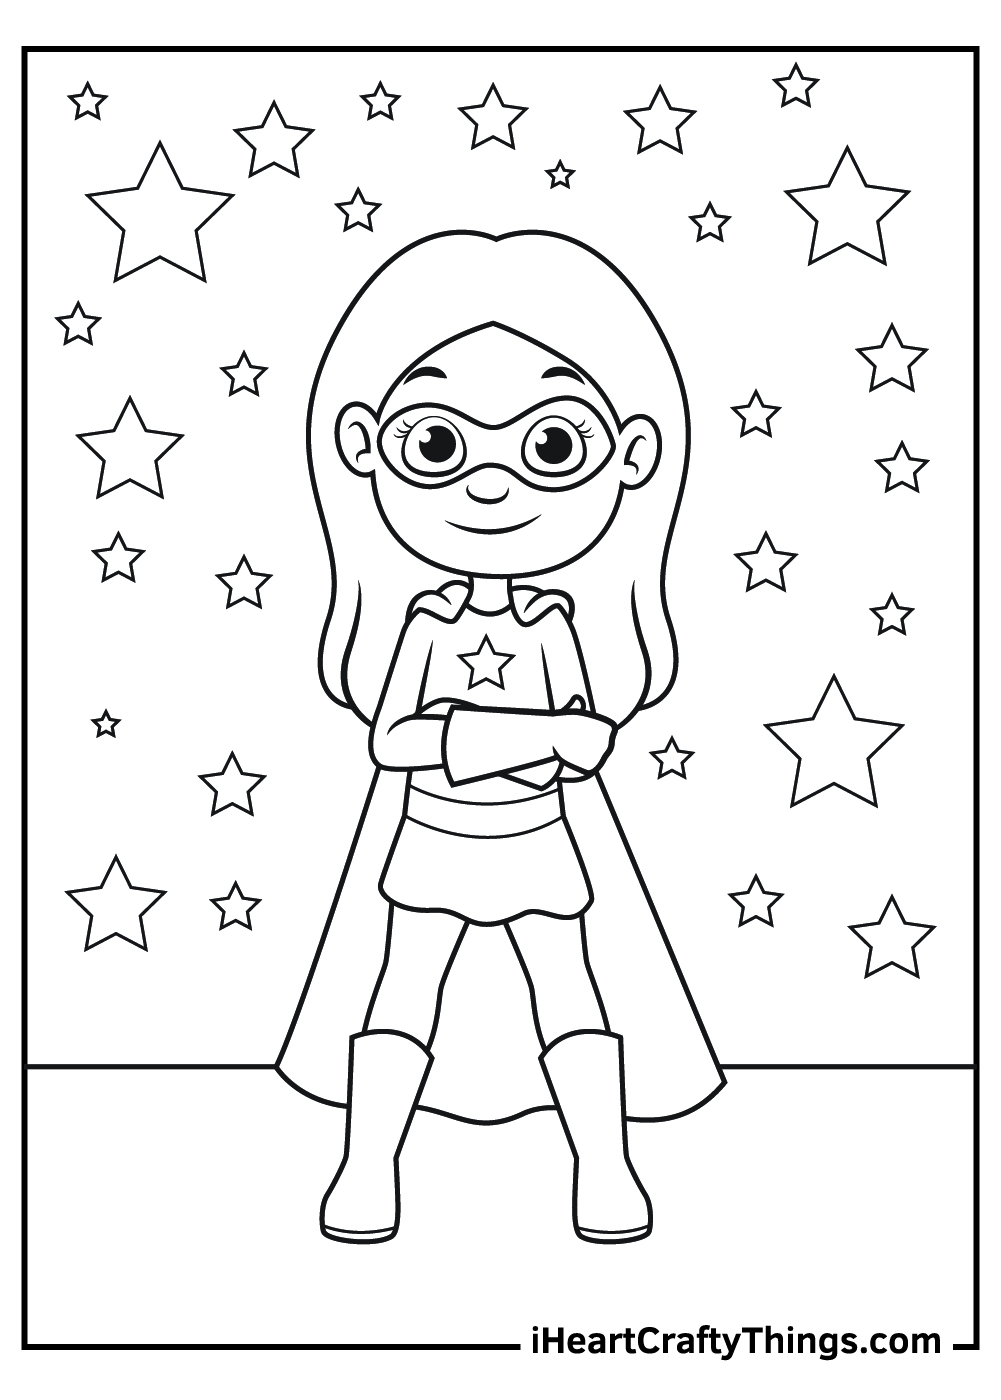 Superhero Coloring Pages Updated 21